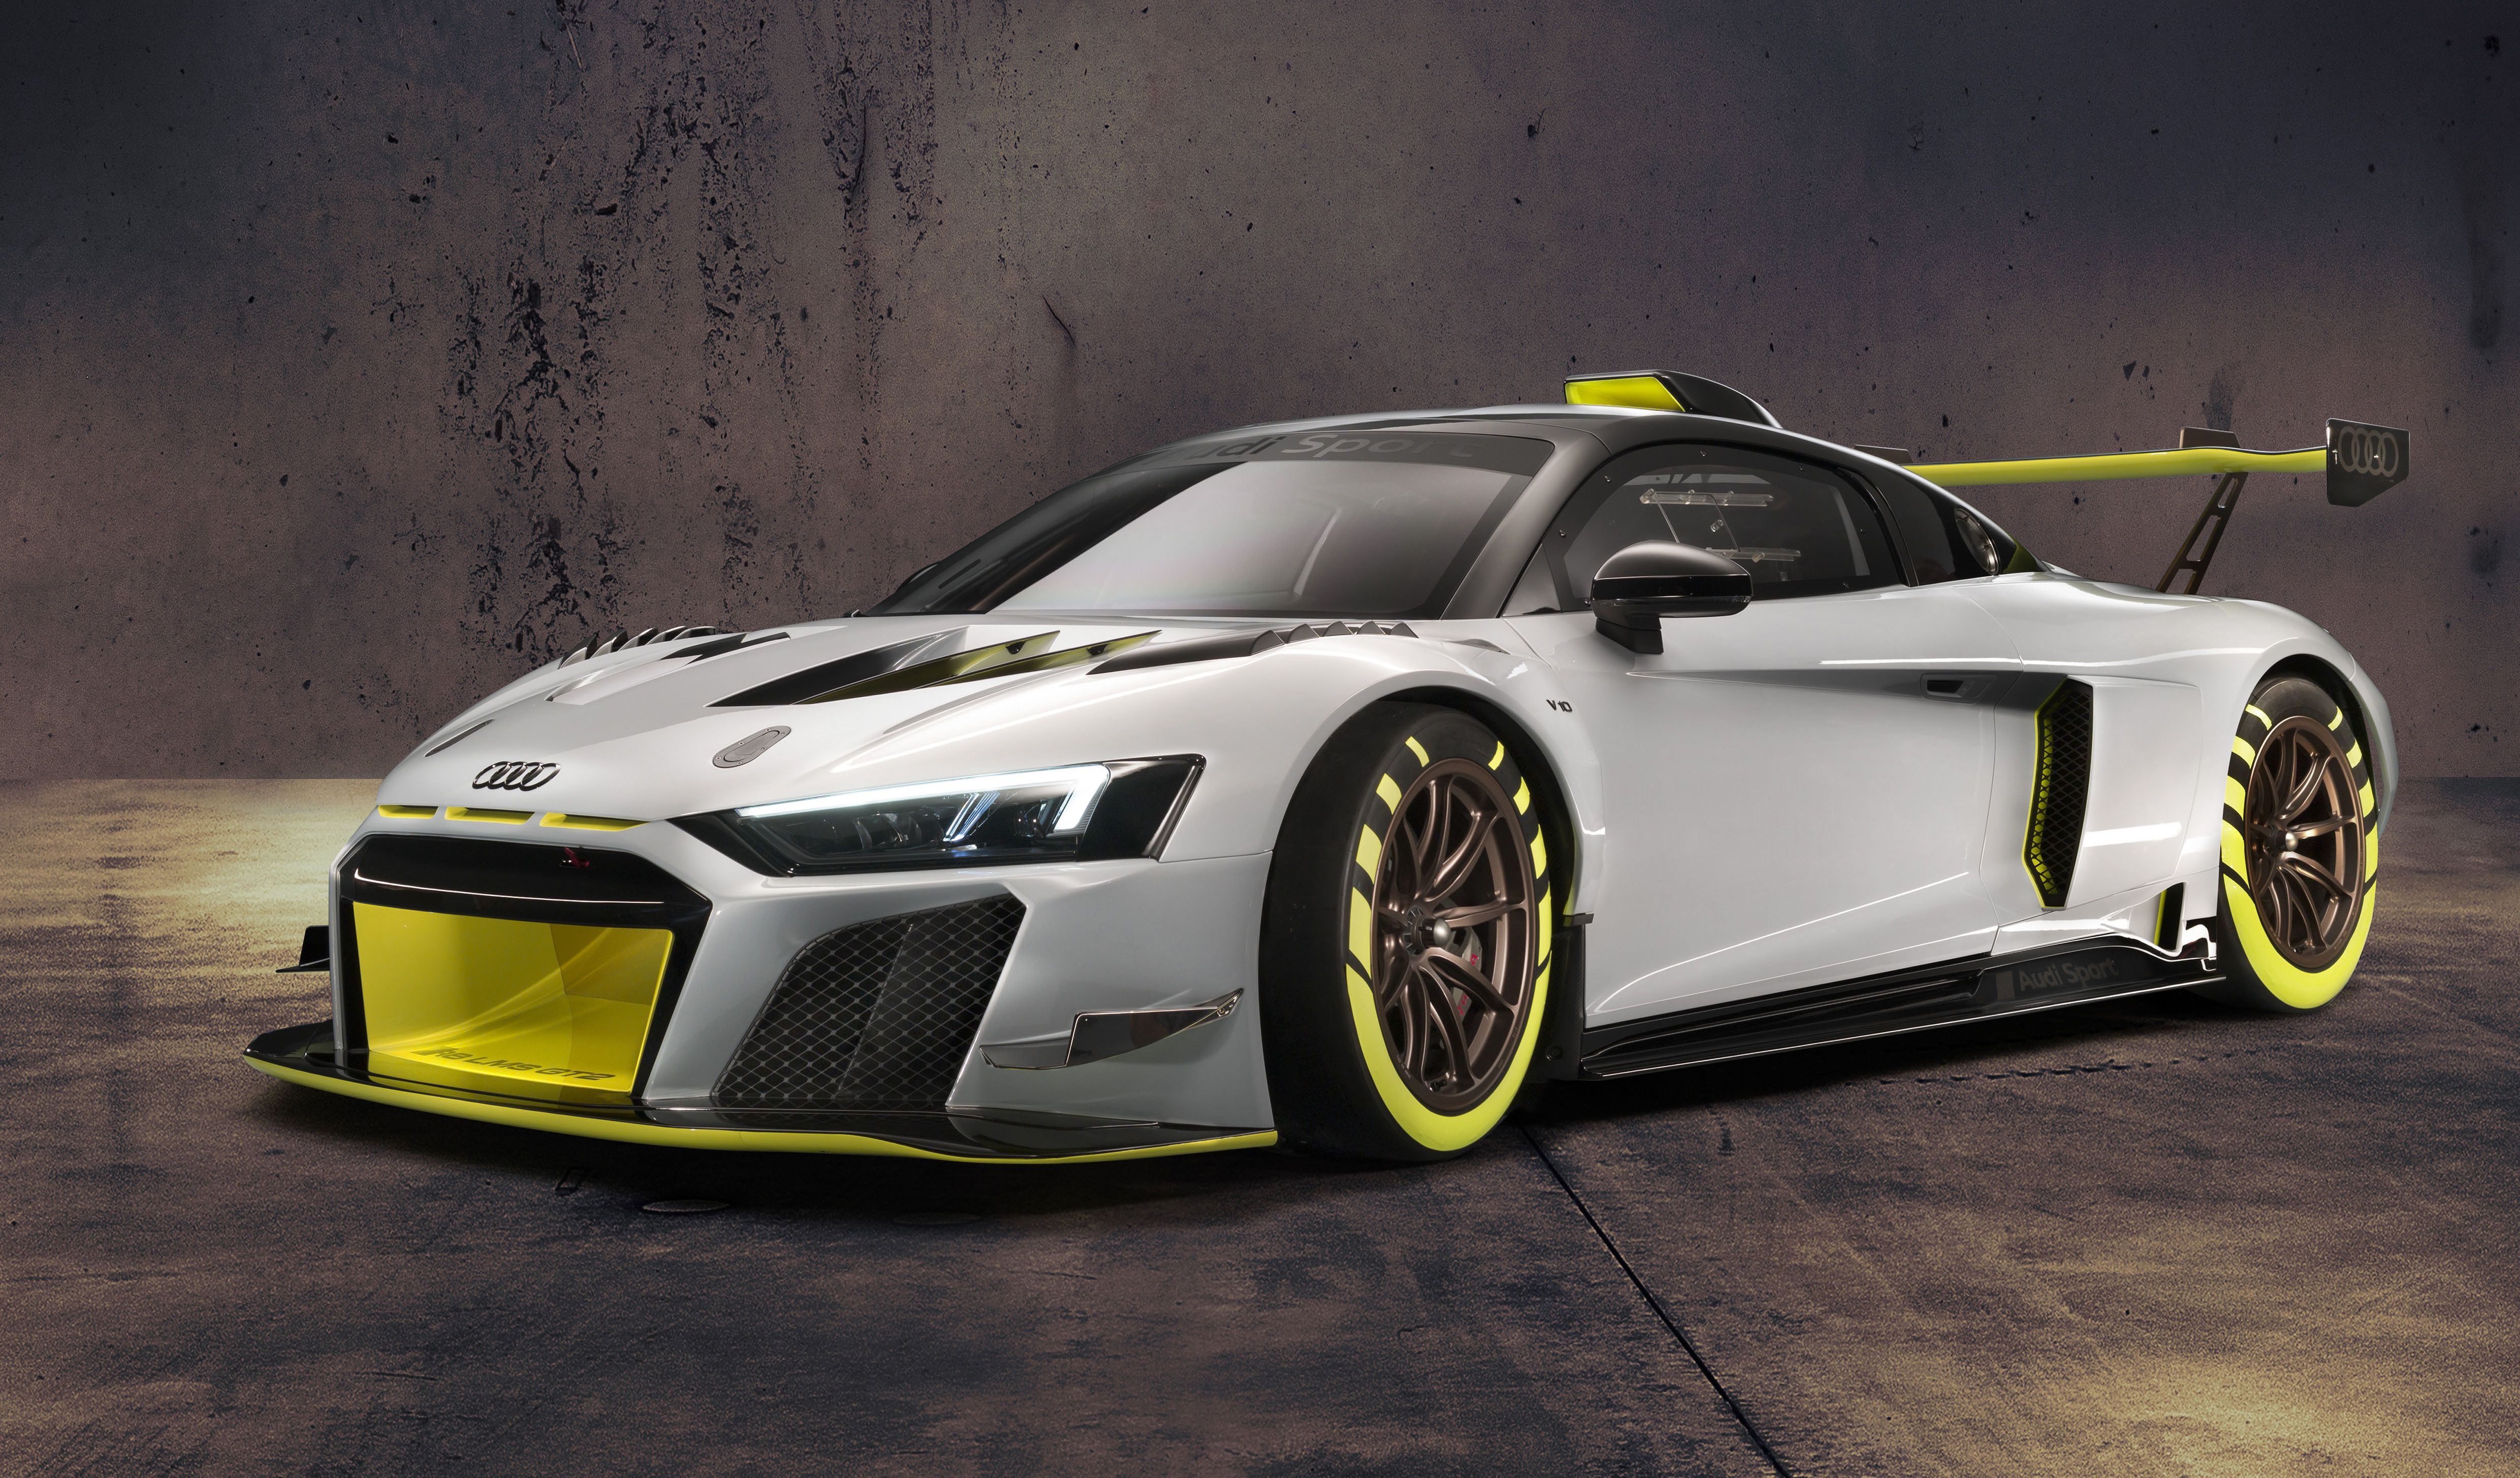 Wallpaper Audi R8 LMS GT 4K, Automotive / Cars,. Wallpaper for iPhone, Android, Mobile and Desktop